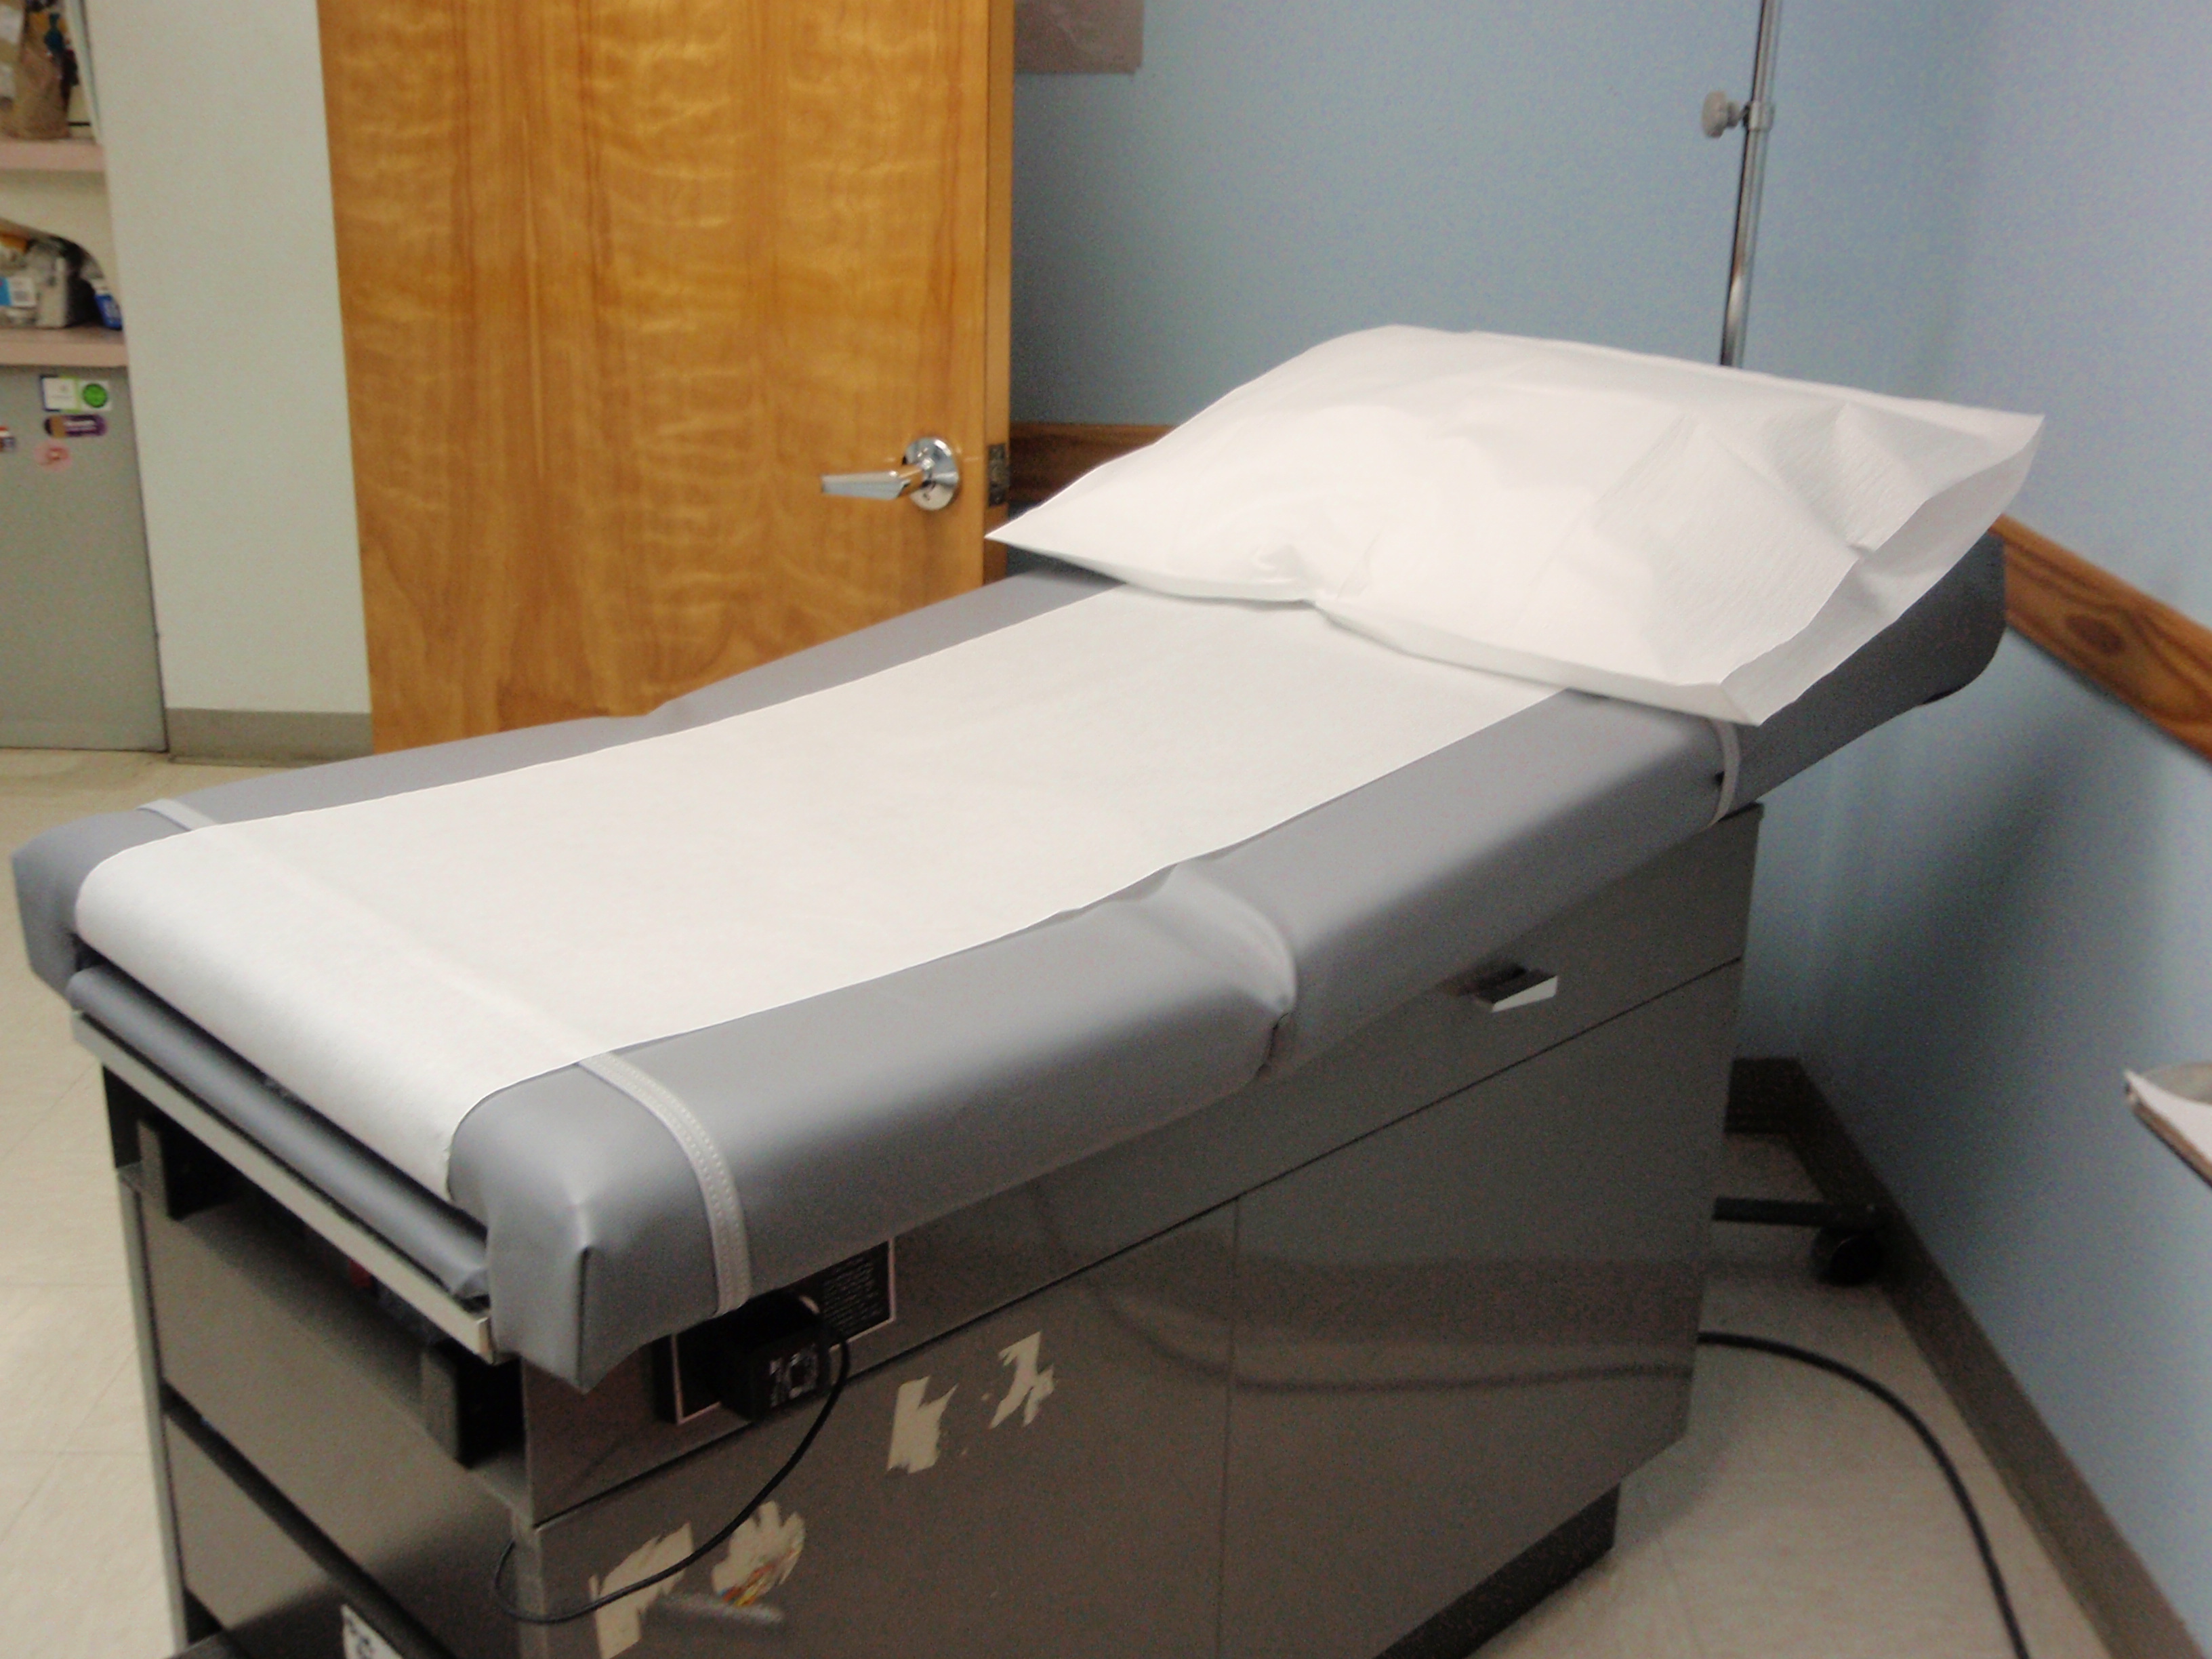 Medical Exam Bed Covers Bb Upholstery